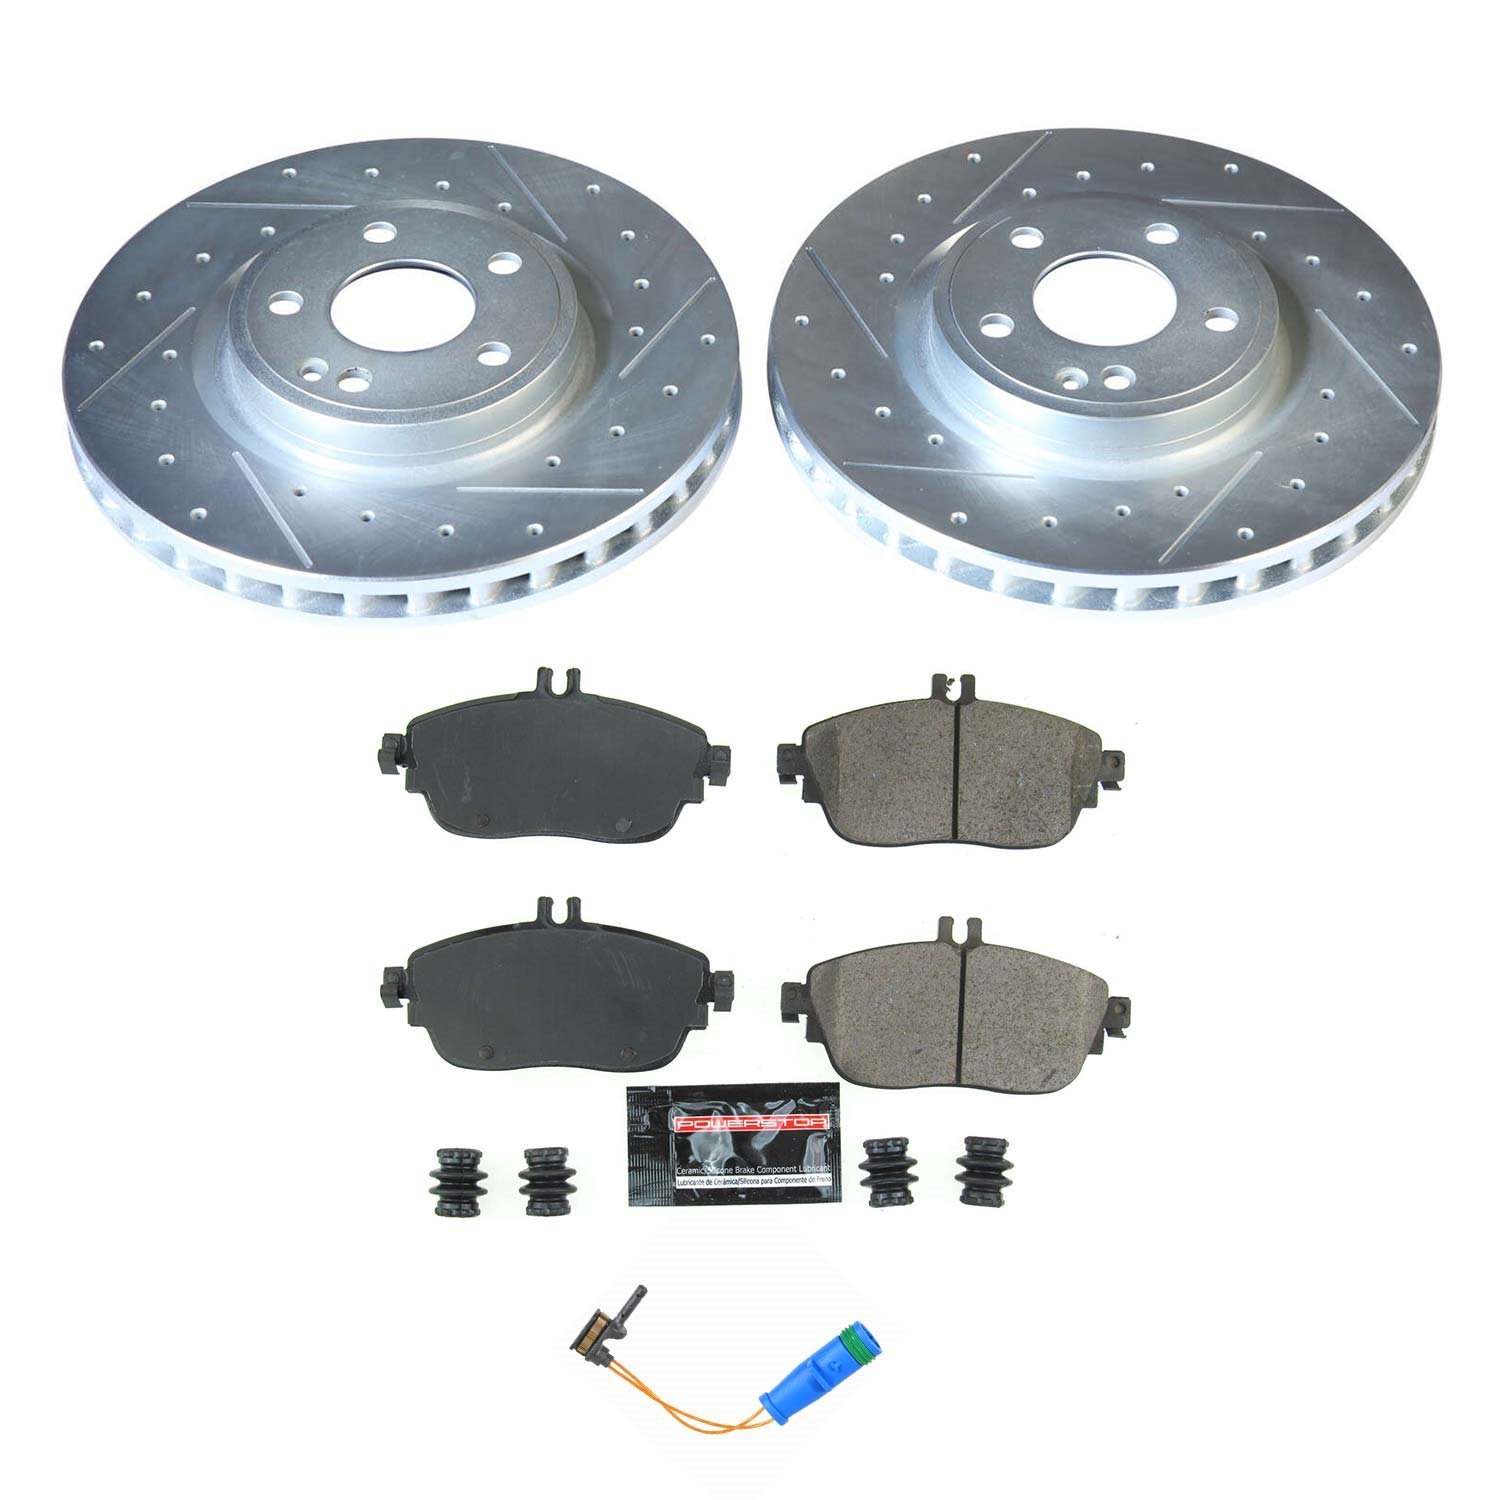 Z23 Front Brake Pads and Rotors Kit Fits Select Infiniti and Mercedes-Benz Models